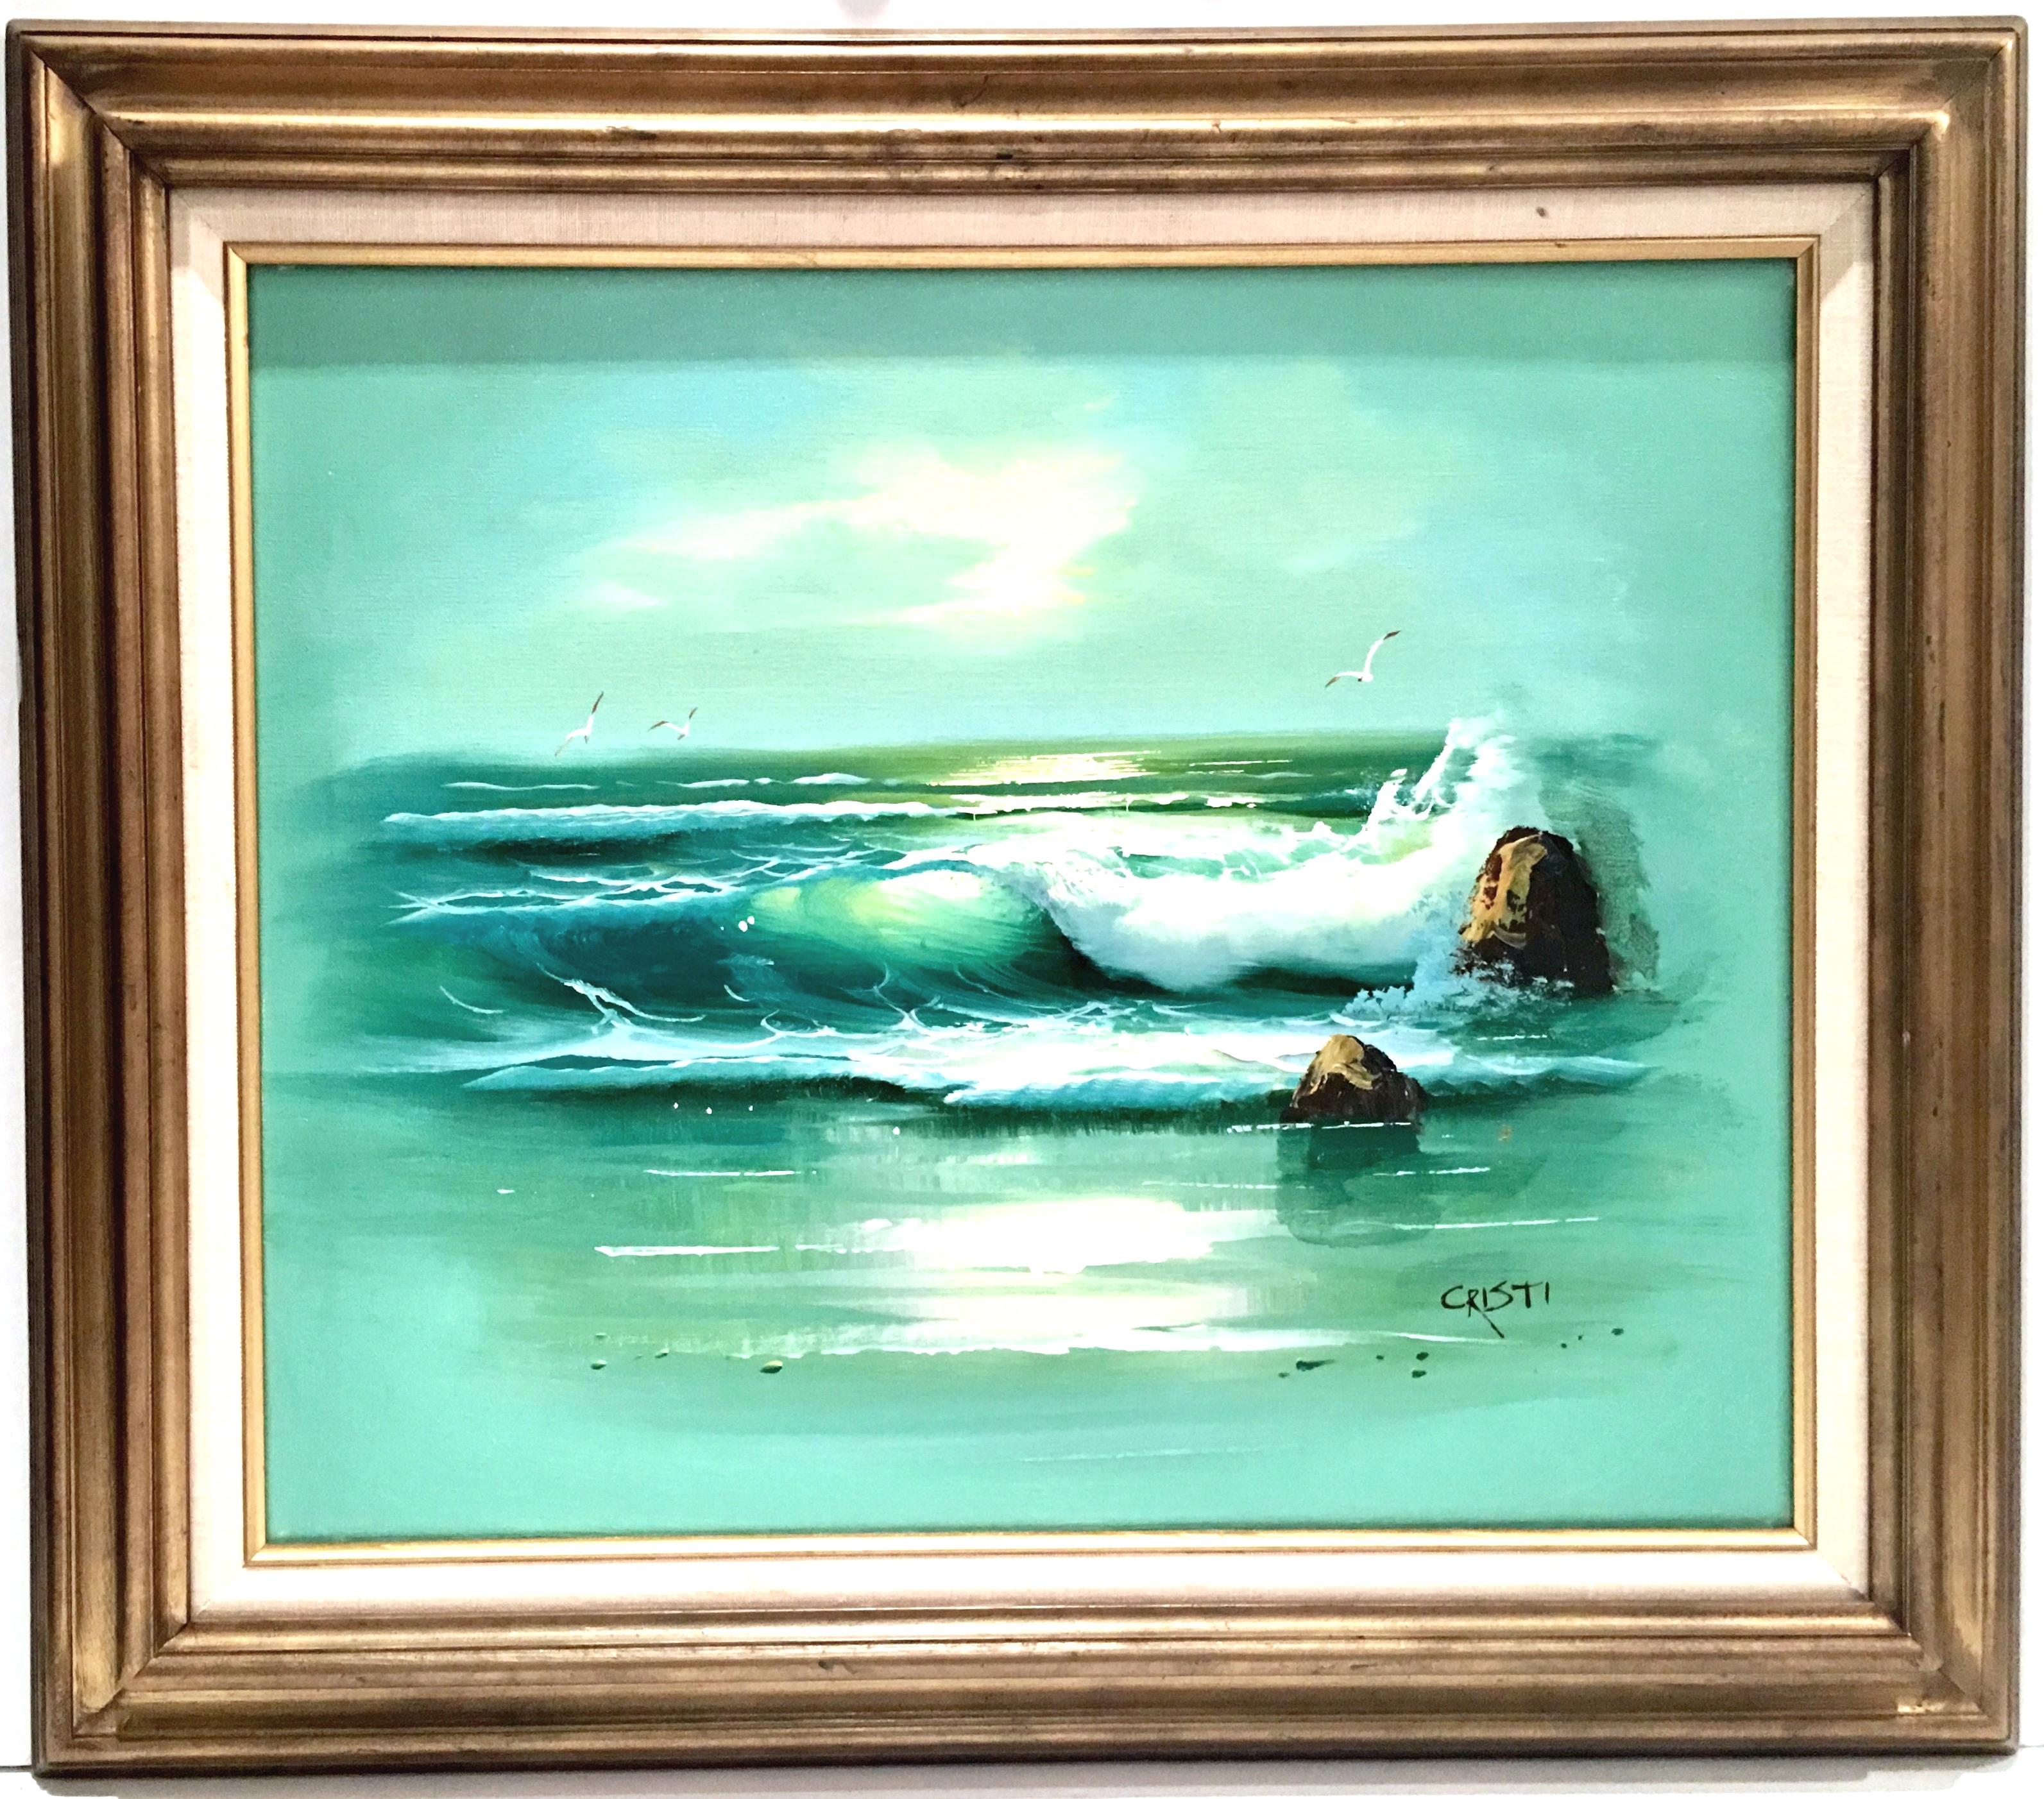 Original Oil On Canvas Painting By Italian artist Cristi. This Spectacular and glowing ocean sunset painting is signed lower right, Cristi.
Listed Artist, Cristi was known to paint almost exclusively ocean scenes. His ability to catch the movement